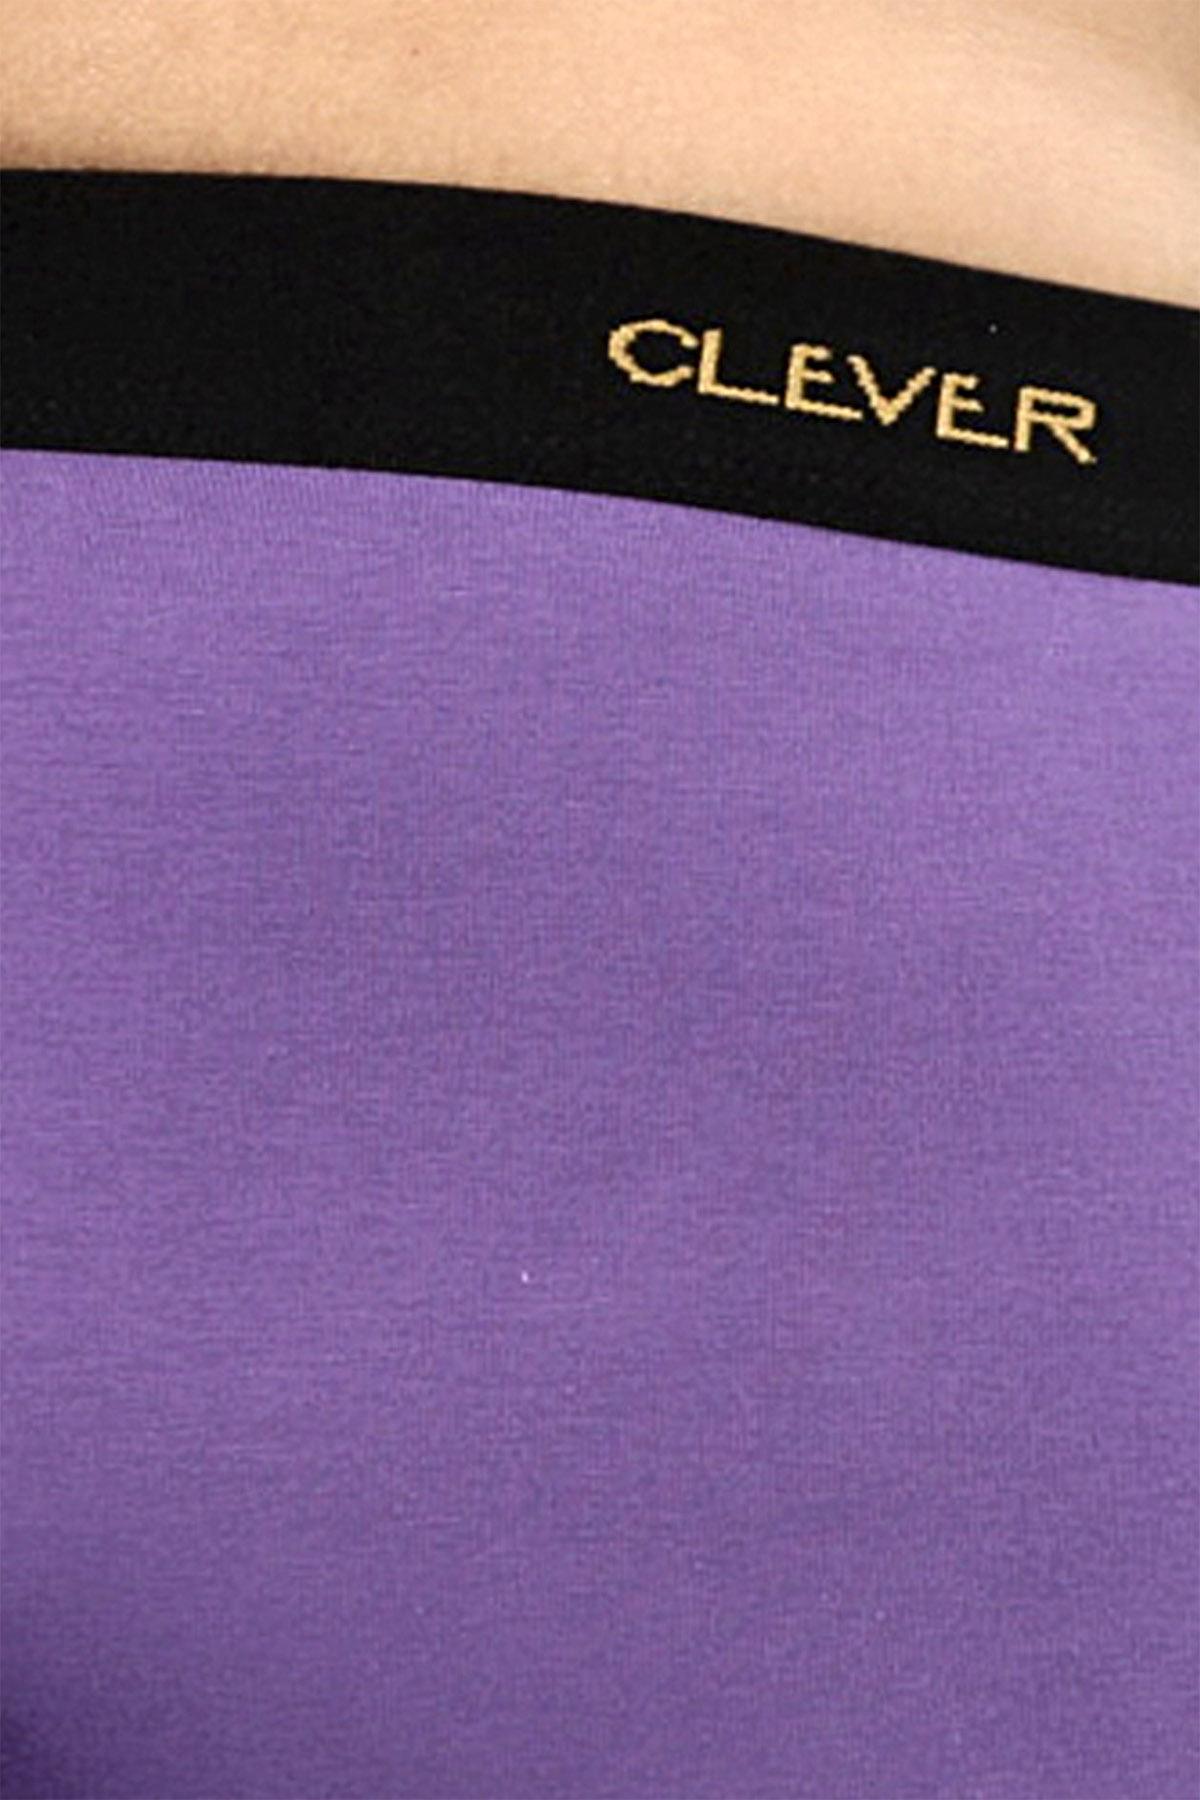 Clever Grape Limited Edition Trunk